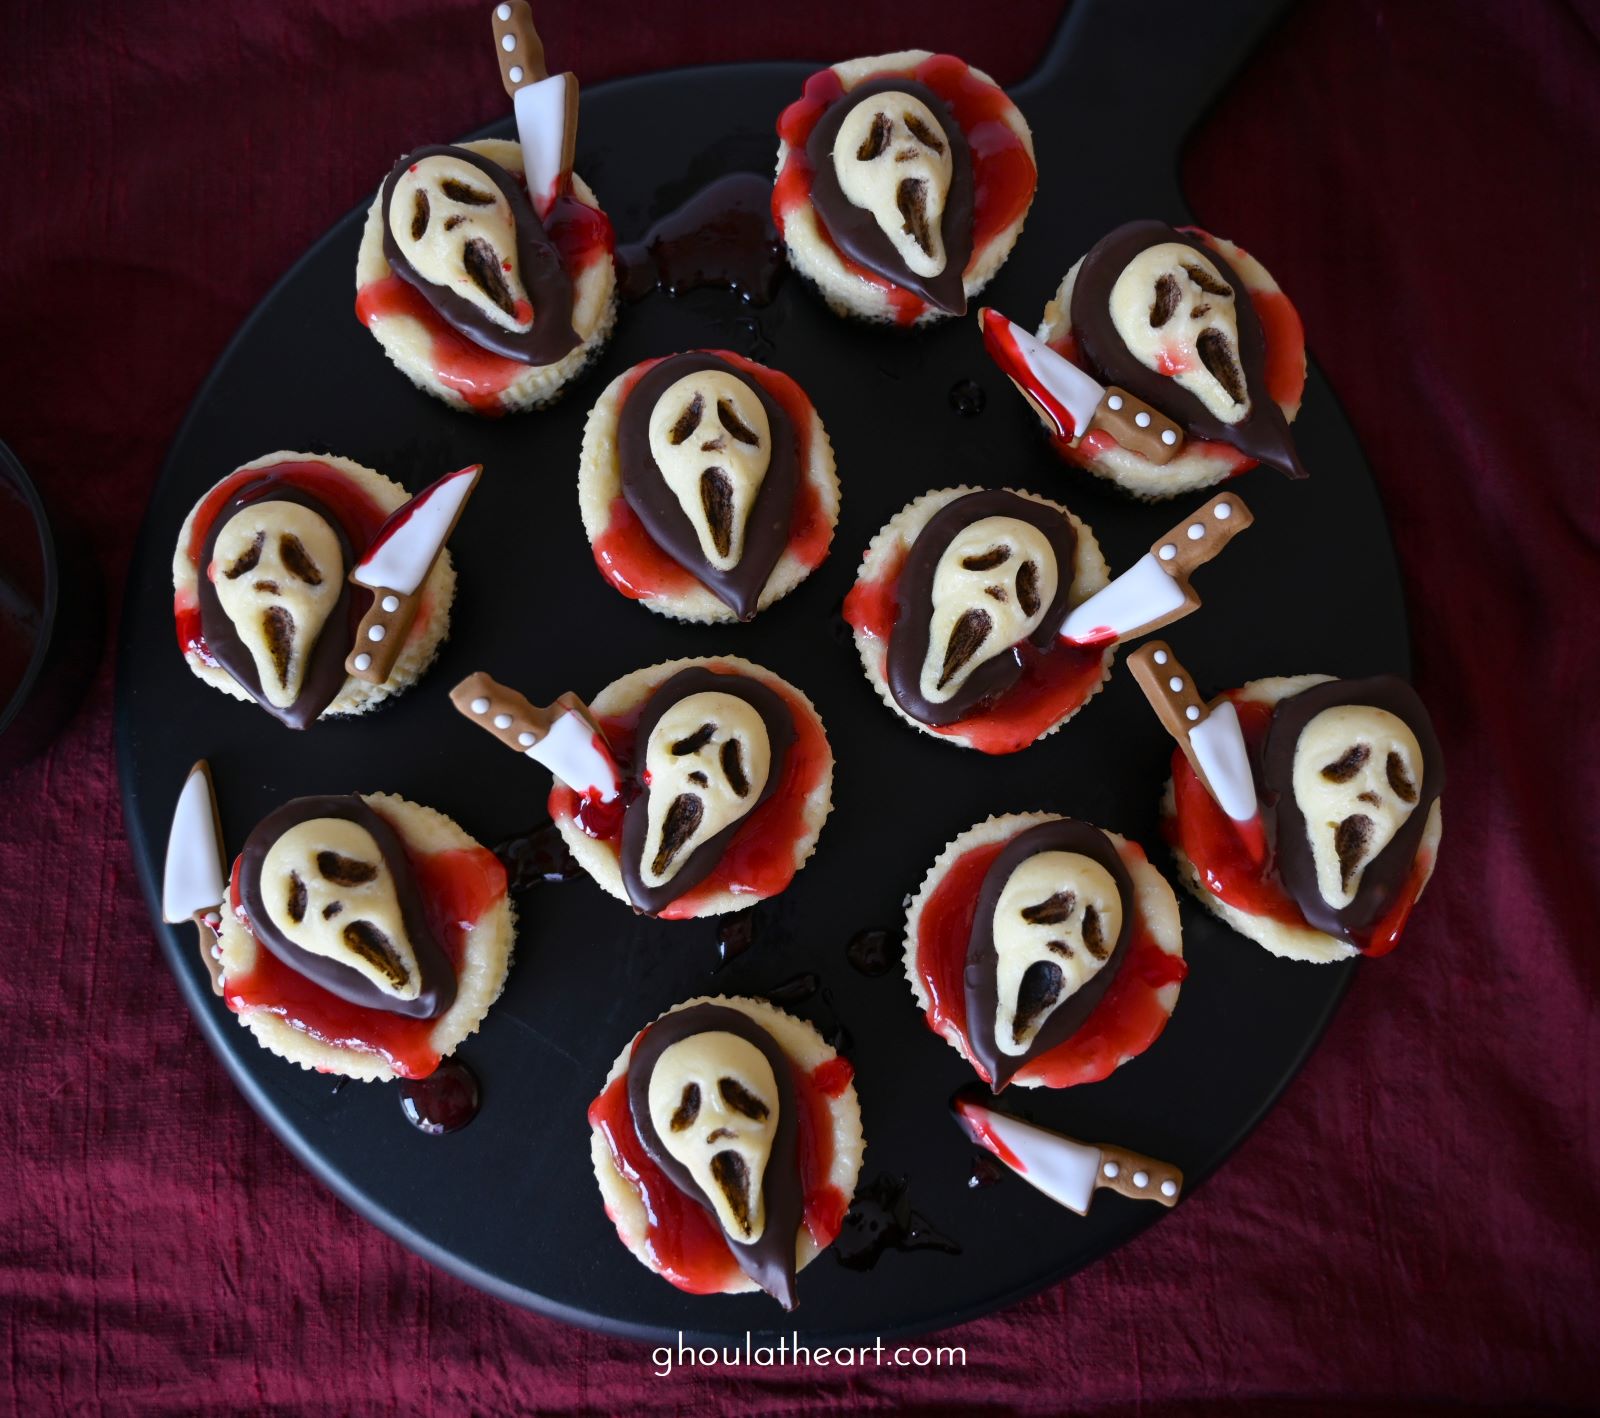 https://ghoulatheart.com/wp-content/uploads/2023/08/Scream-Cheesecakes-rs.jpg